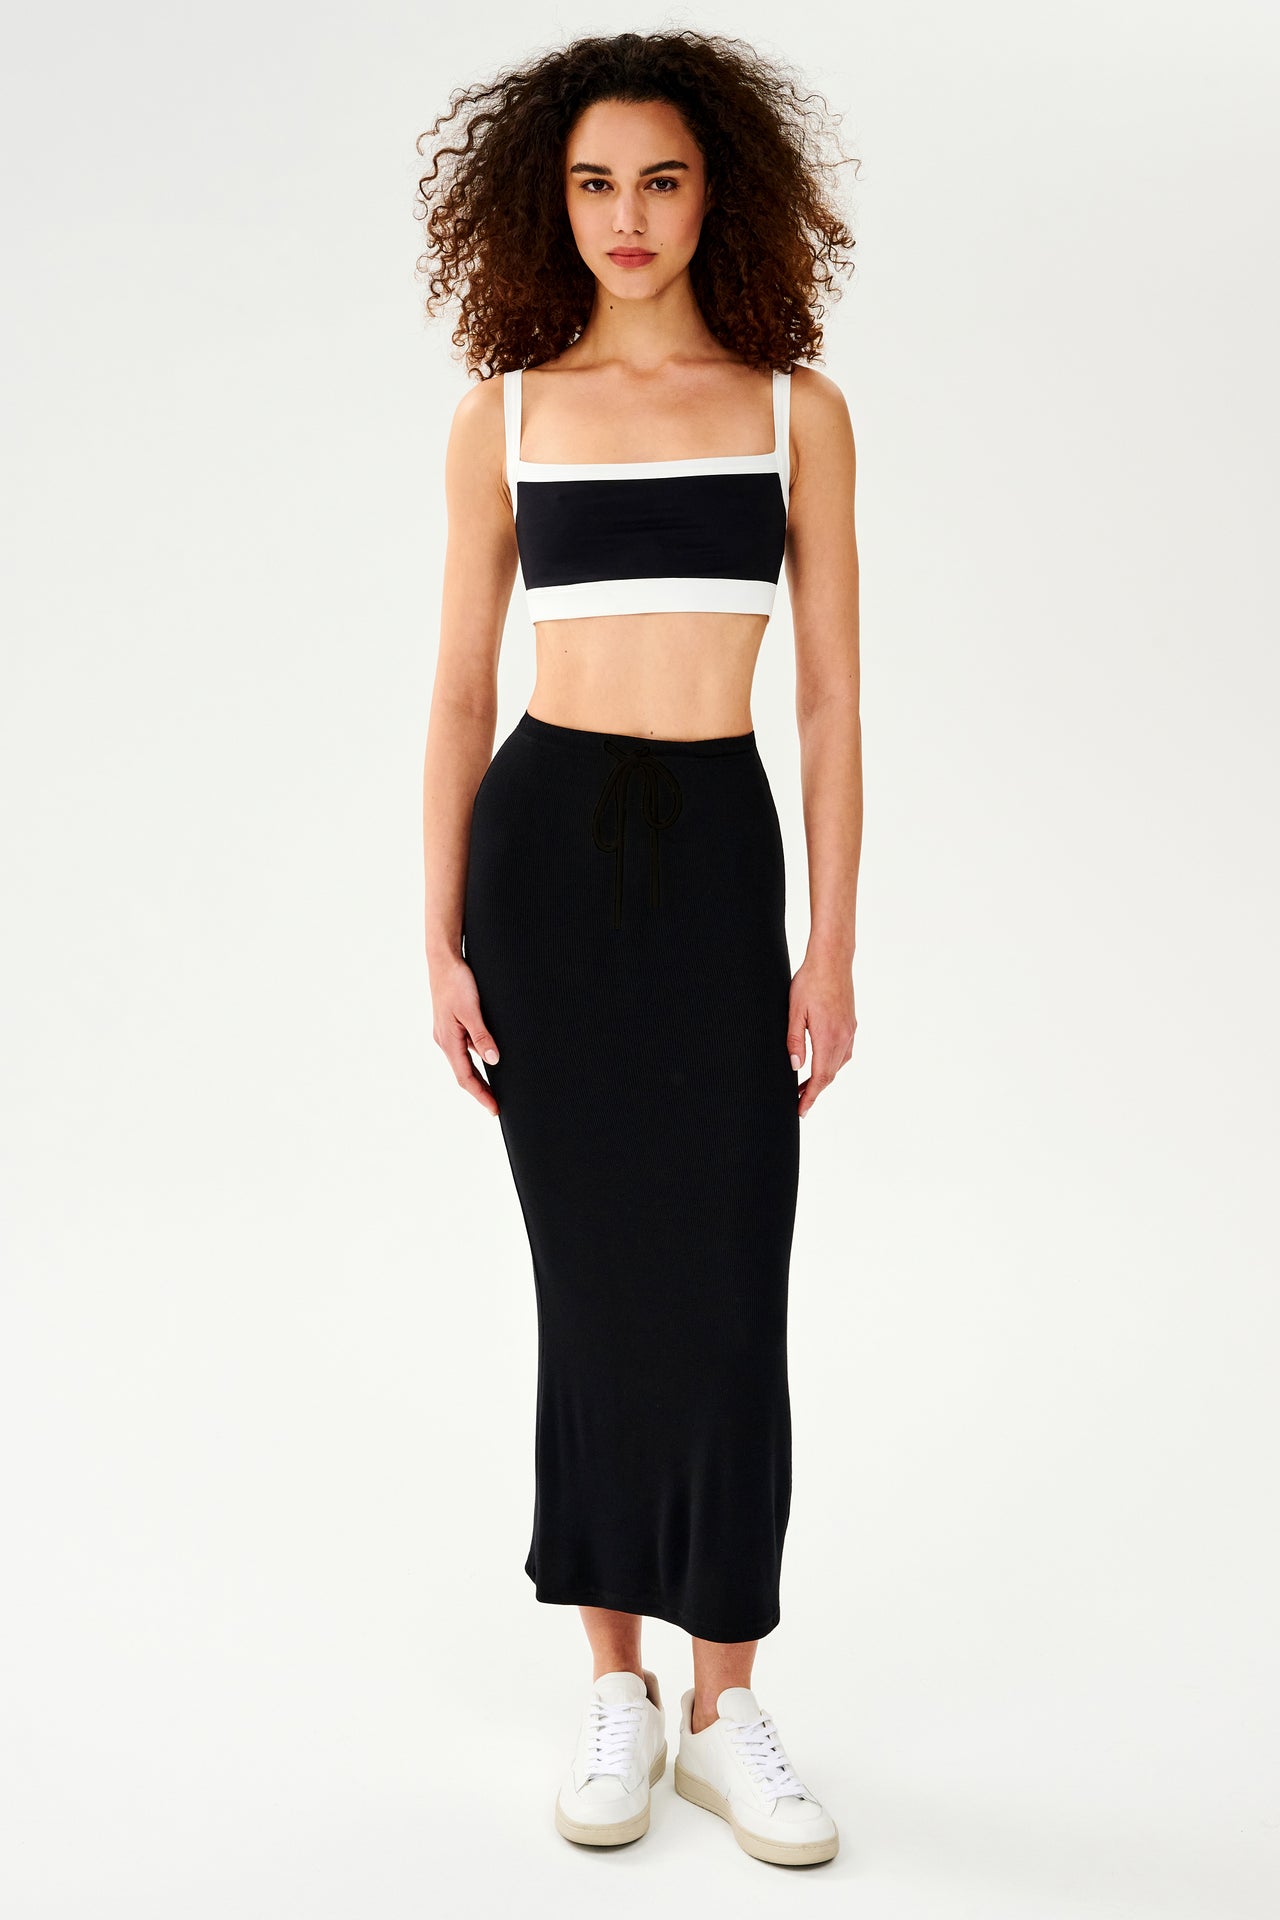 The model is wearing a black and white crop top and SPLITS59 Kiki Rib Maxi Skirt - Black, perfect for lounging at home.